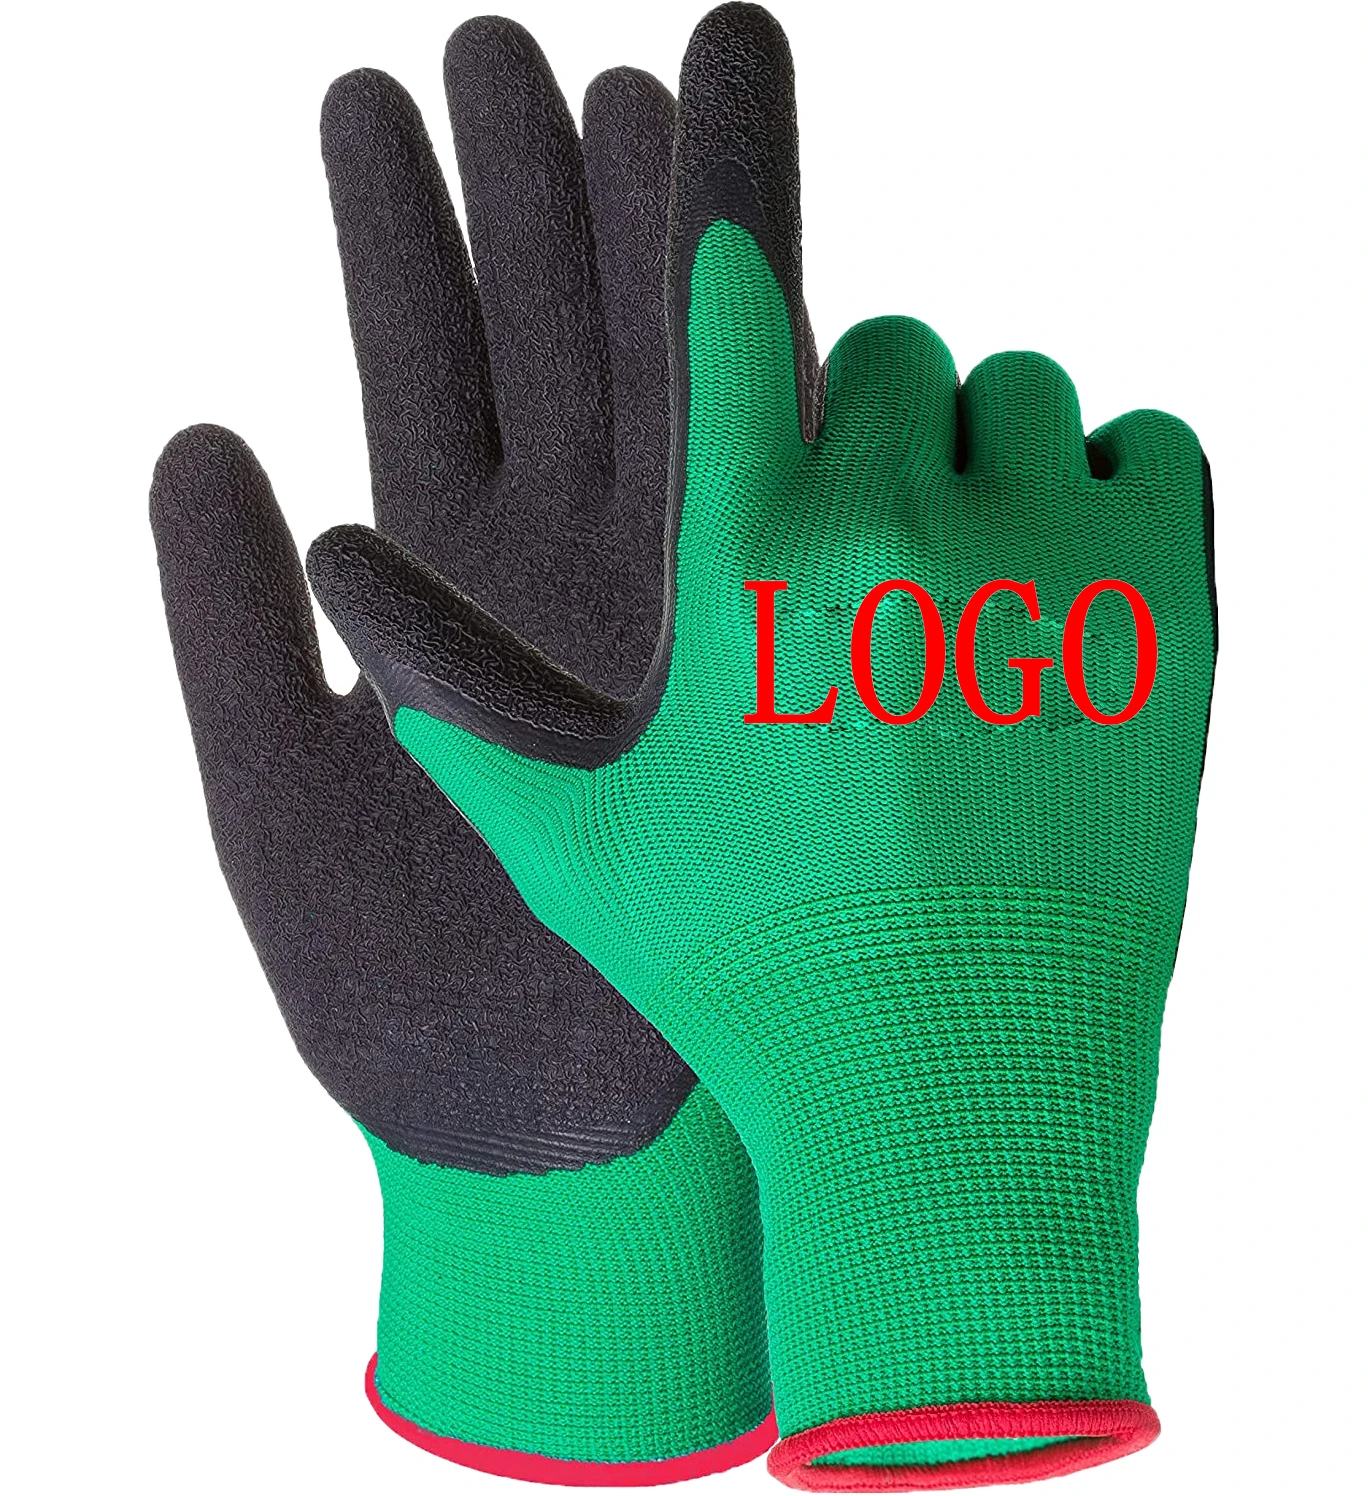 Anti cut gloves, Kids cut protection gloves